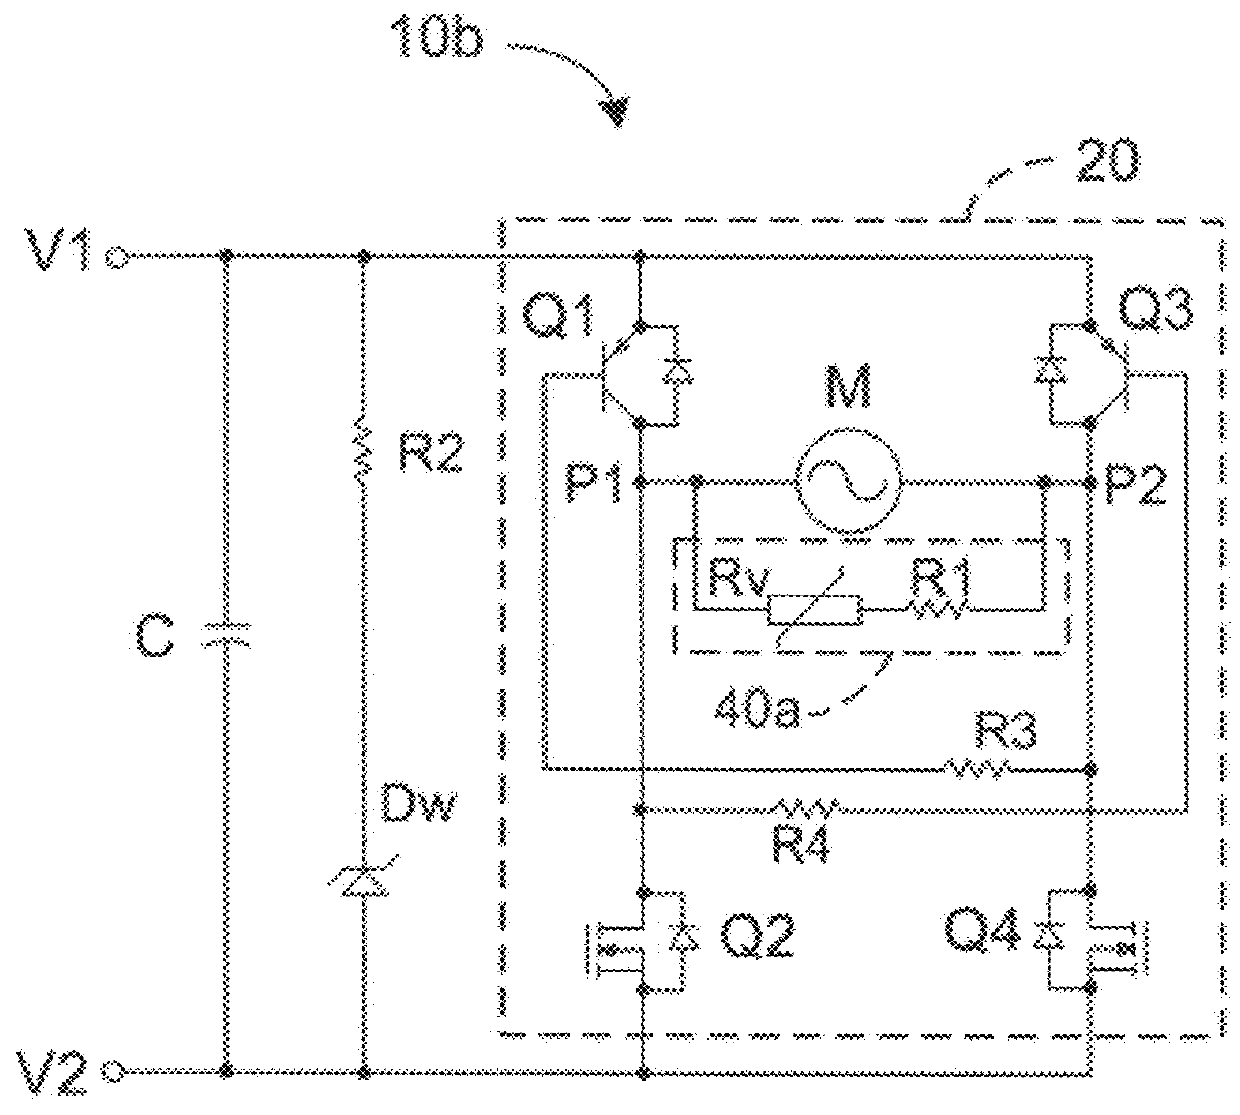 Control circuit for a DC motor